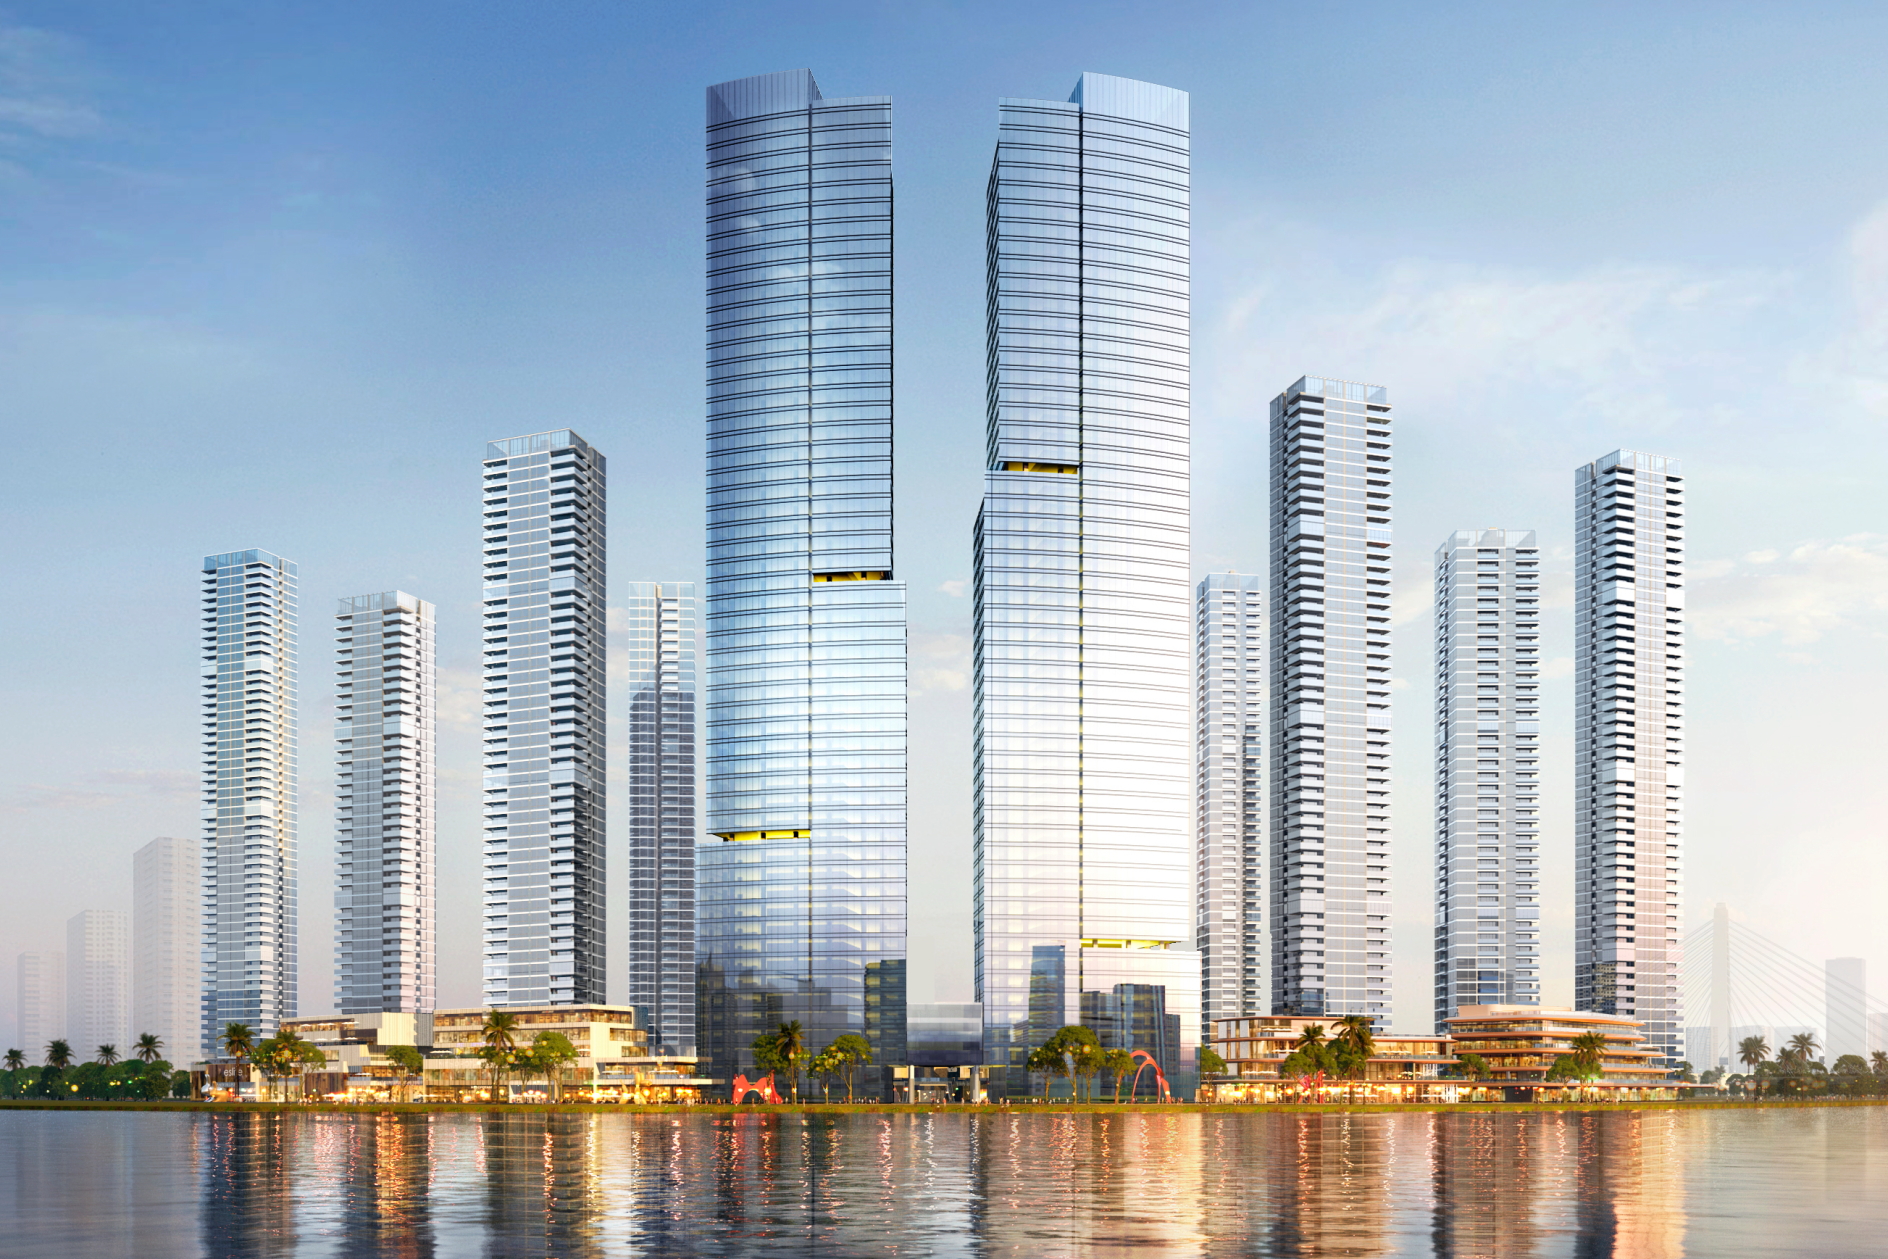 The Langham, Foshan is expected to open in 2028. Click to enlarge.